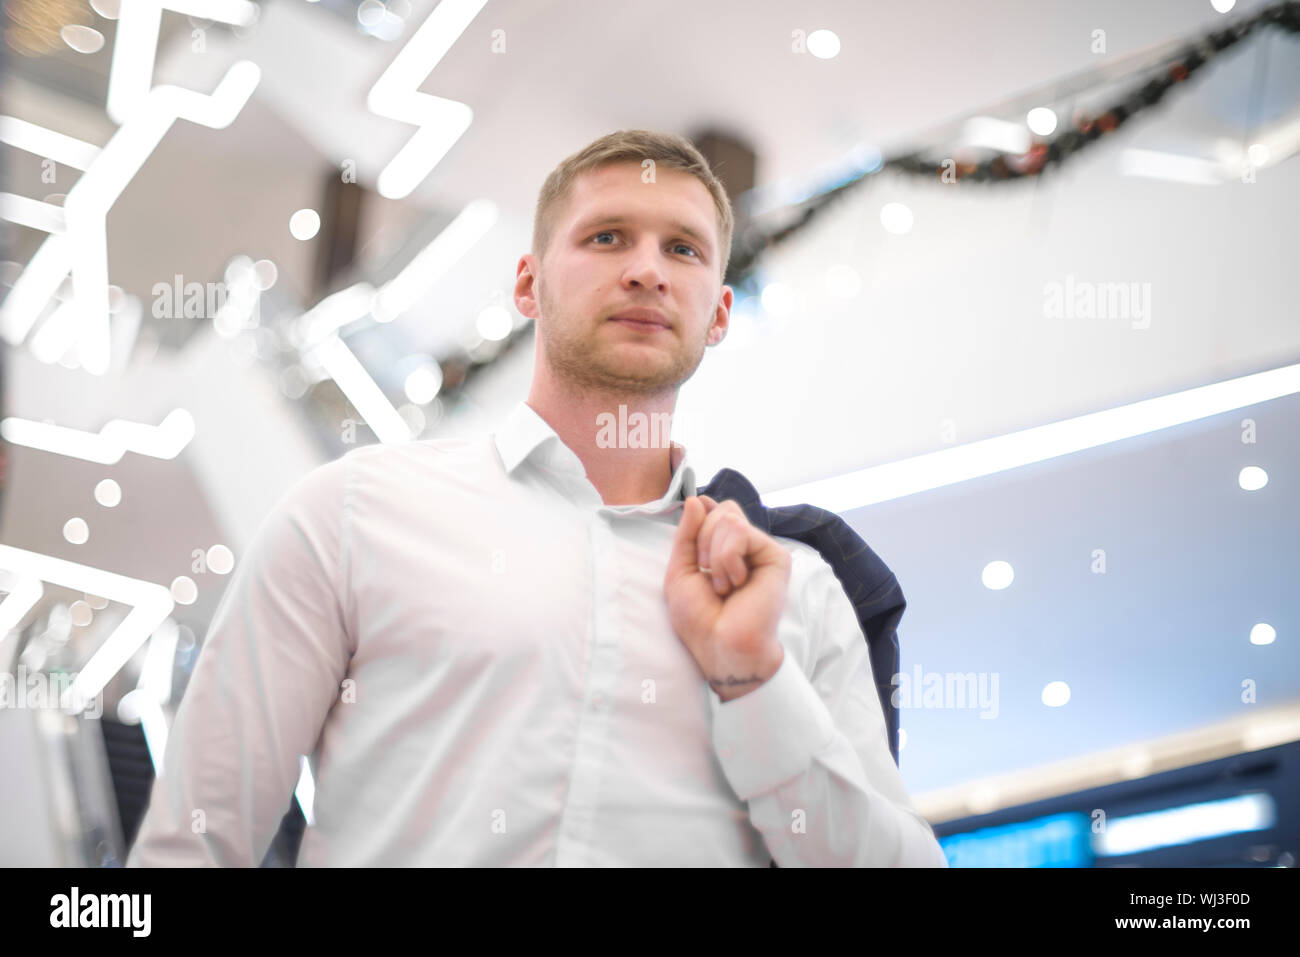 man with a jacket on his shoulder in the building Stock Photo